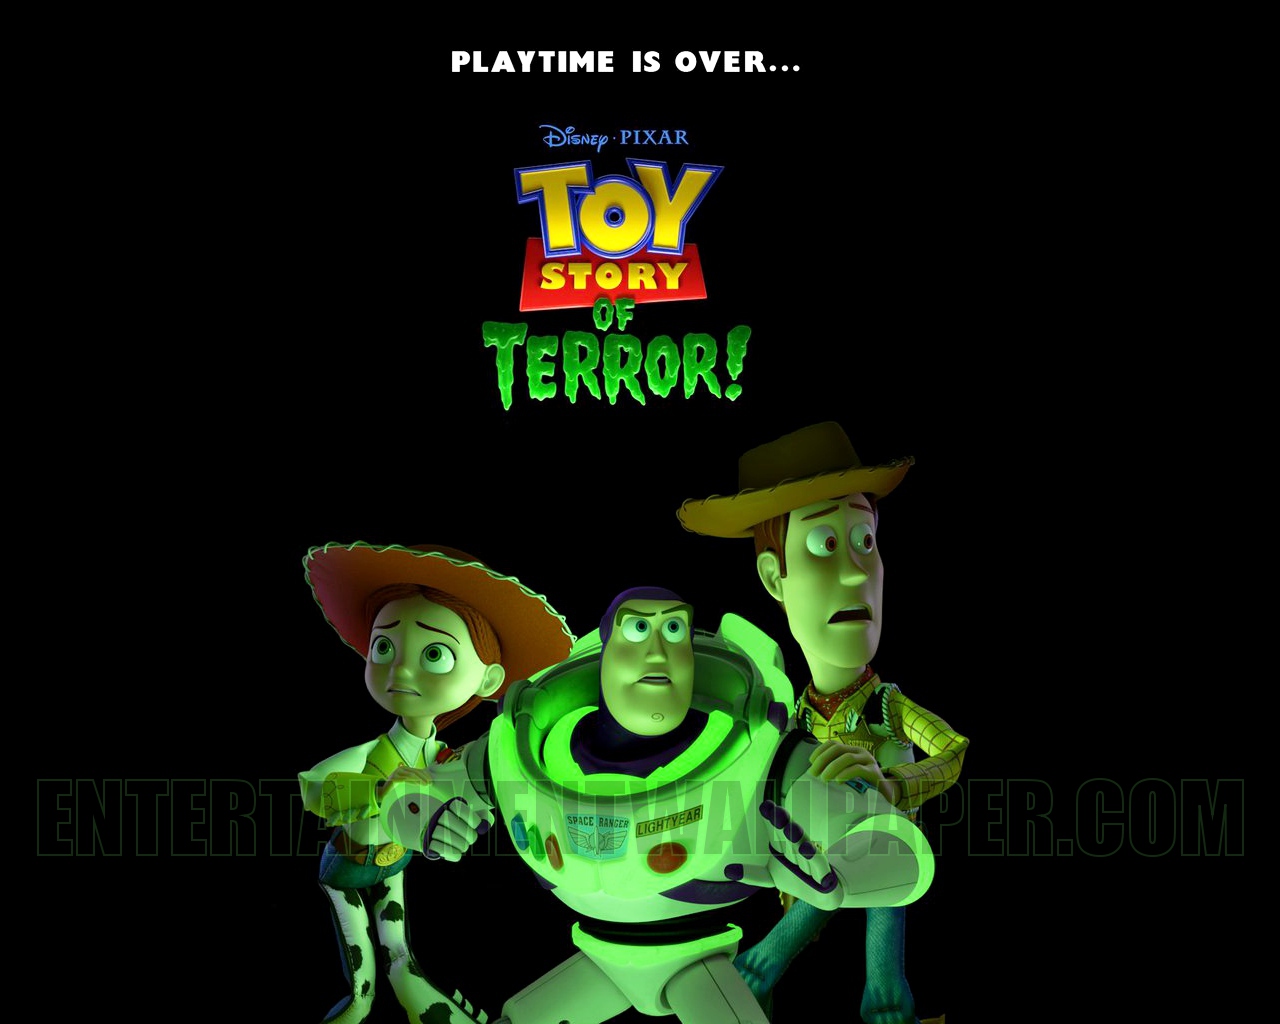  toy story of terror wallpaper 10042007 size 1280x1024 more toy story